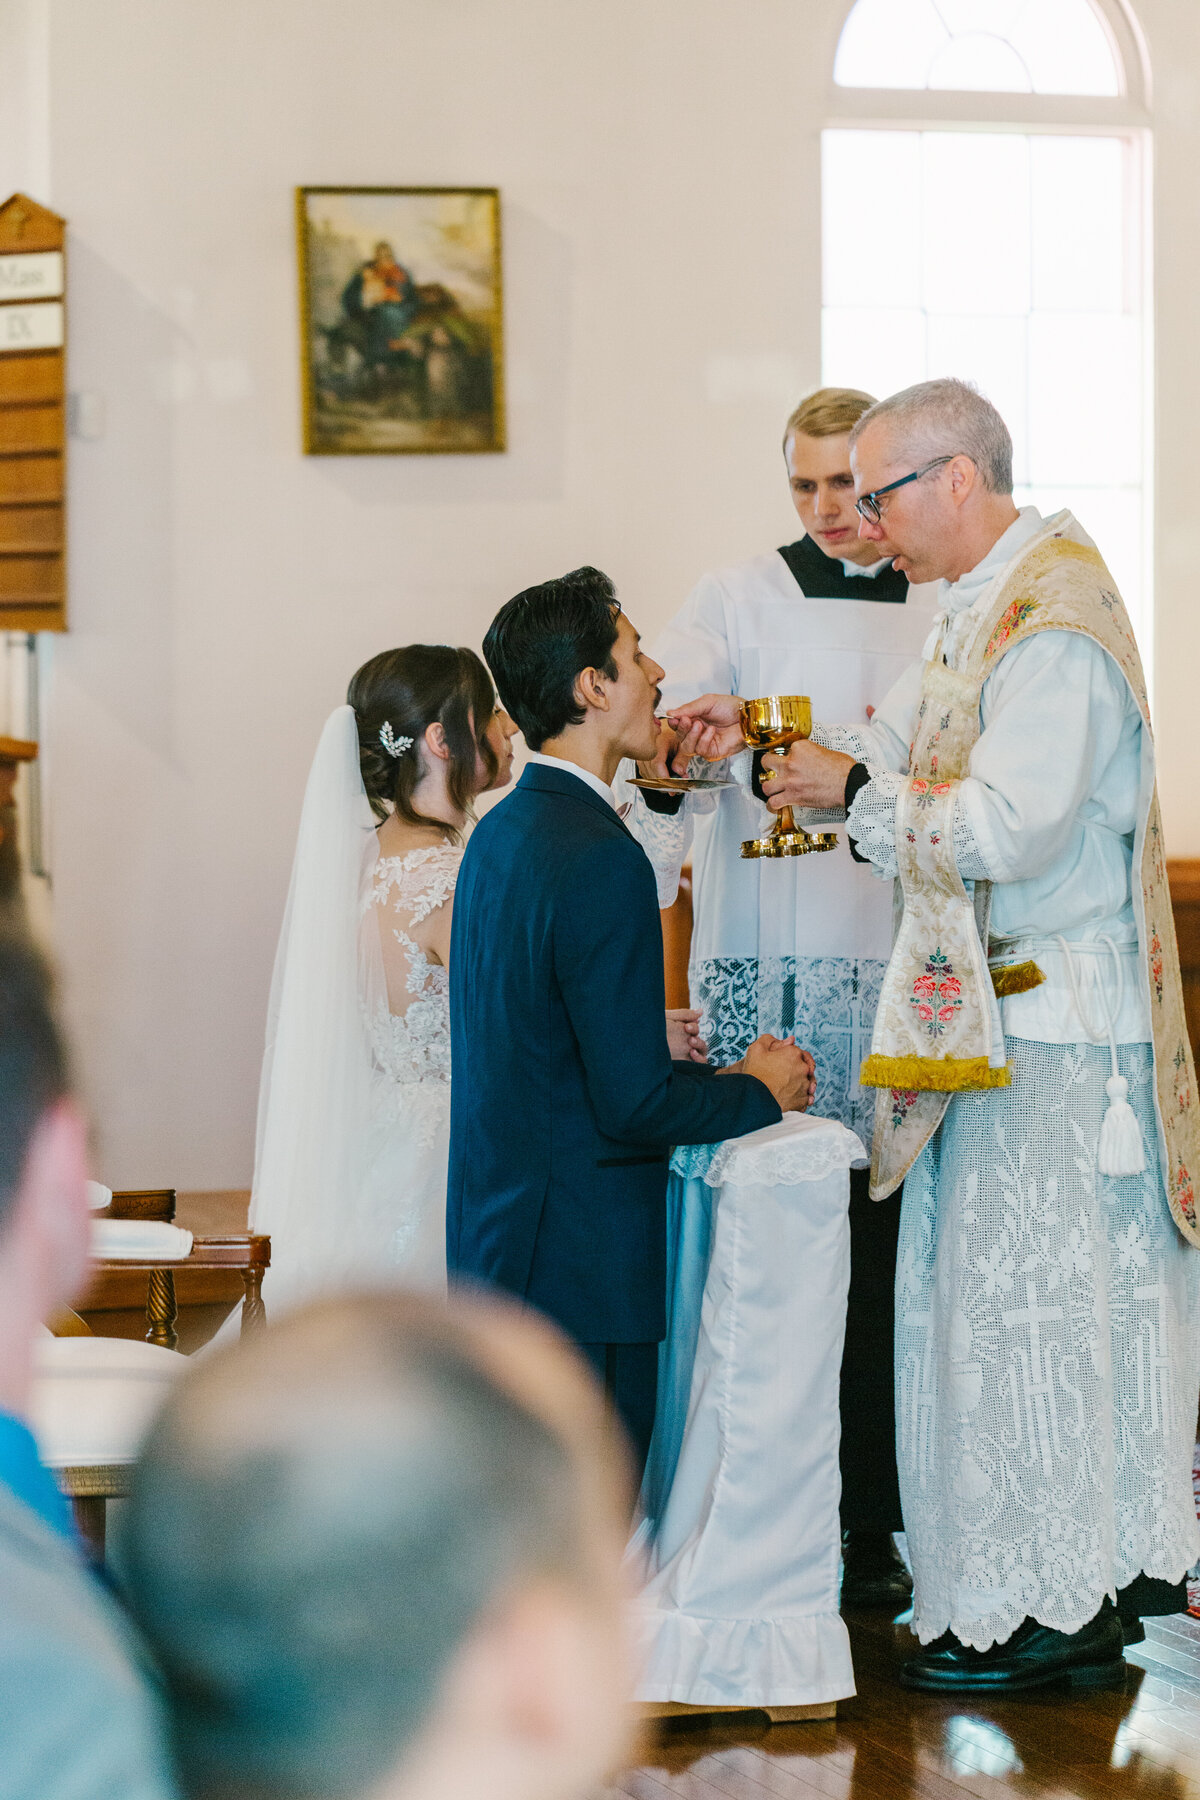 Bride and groom kneeling down taking communion from priest